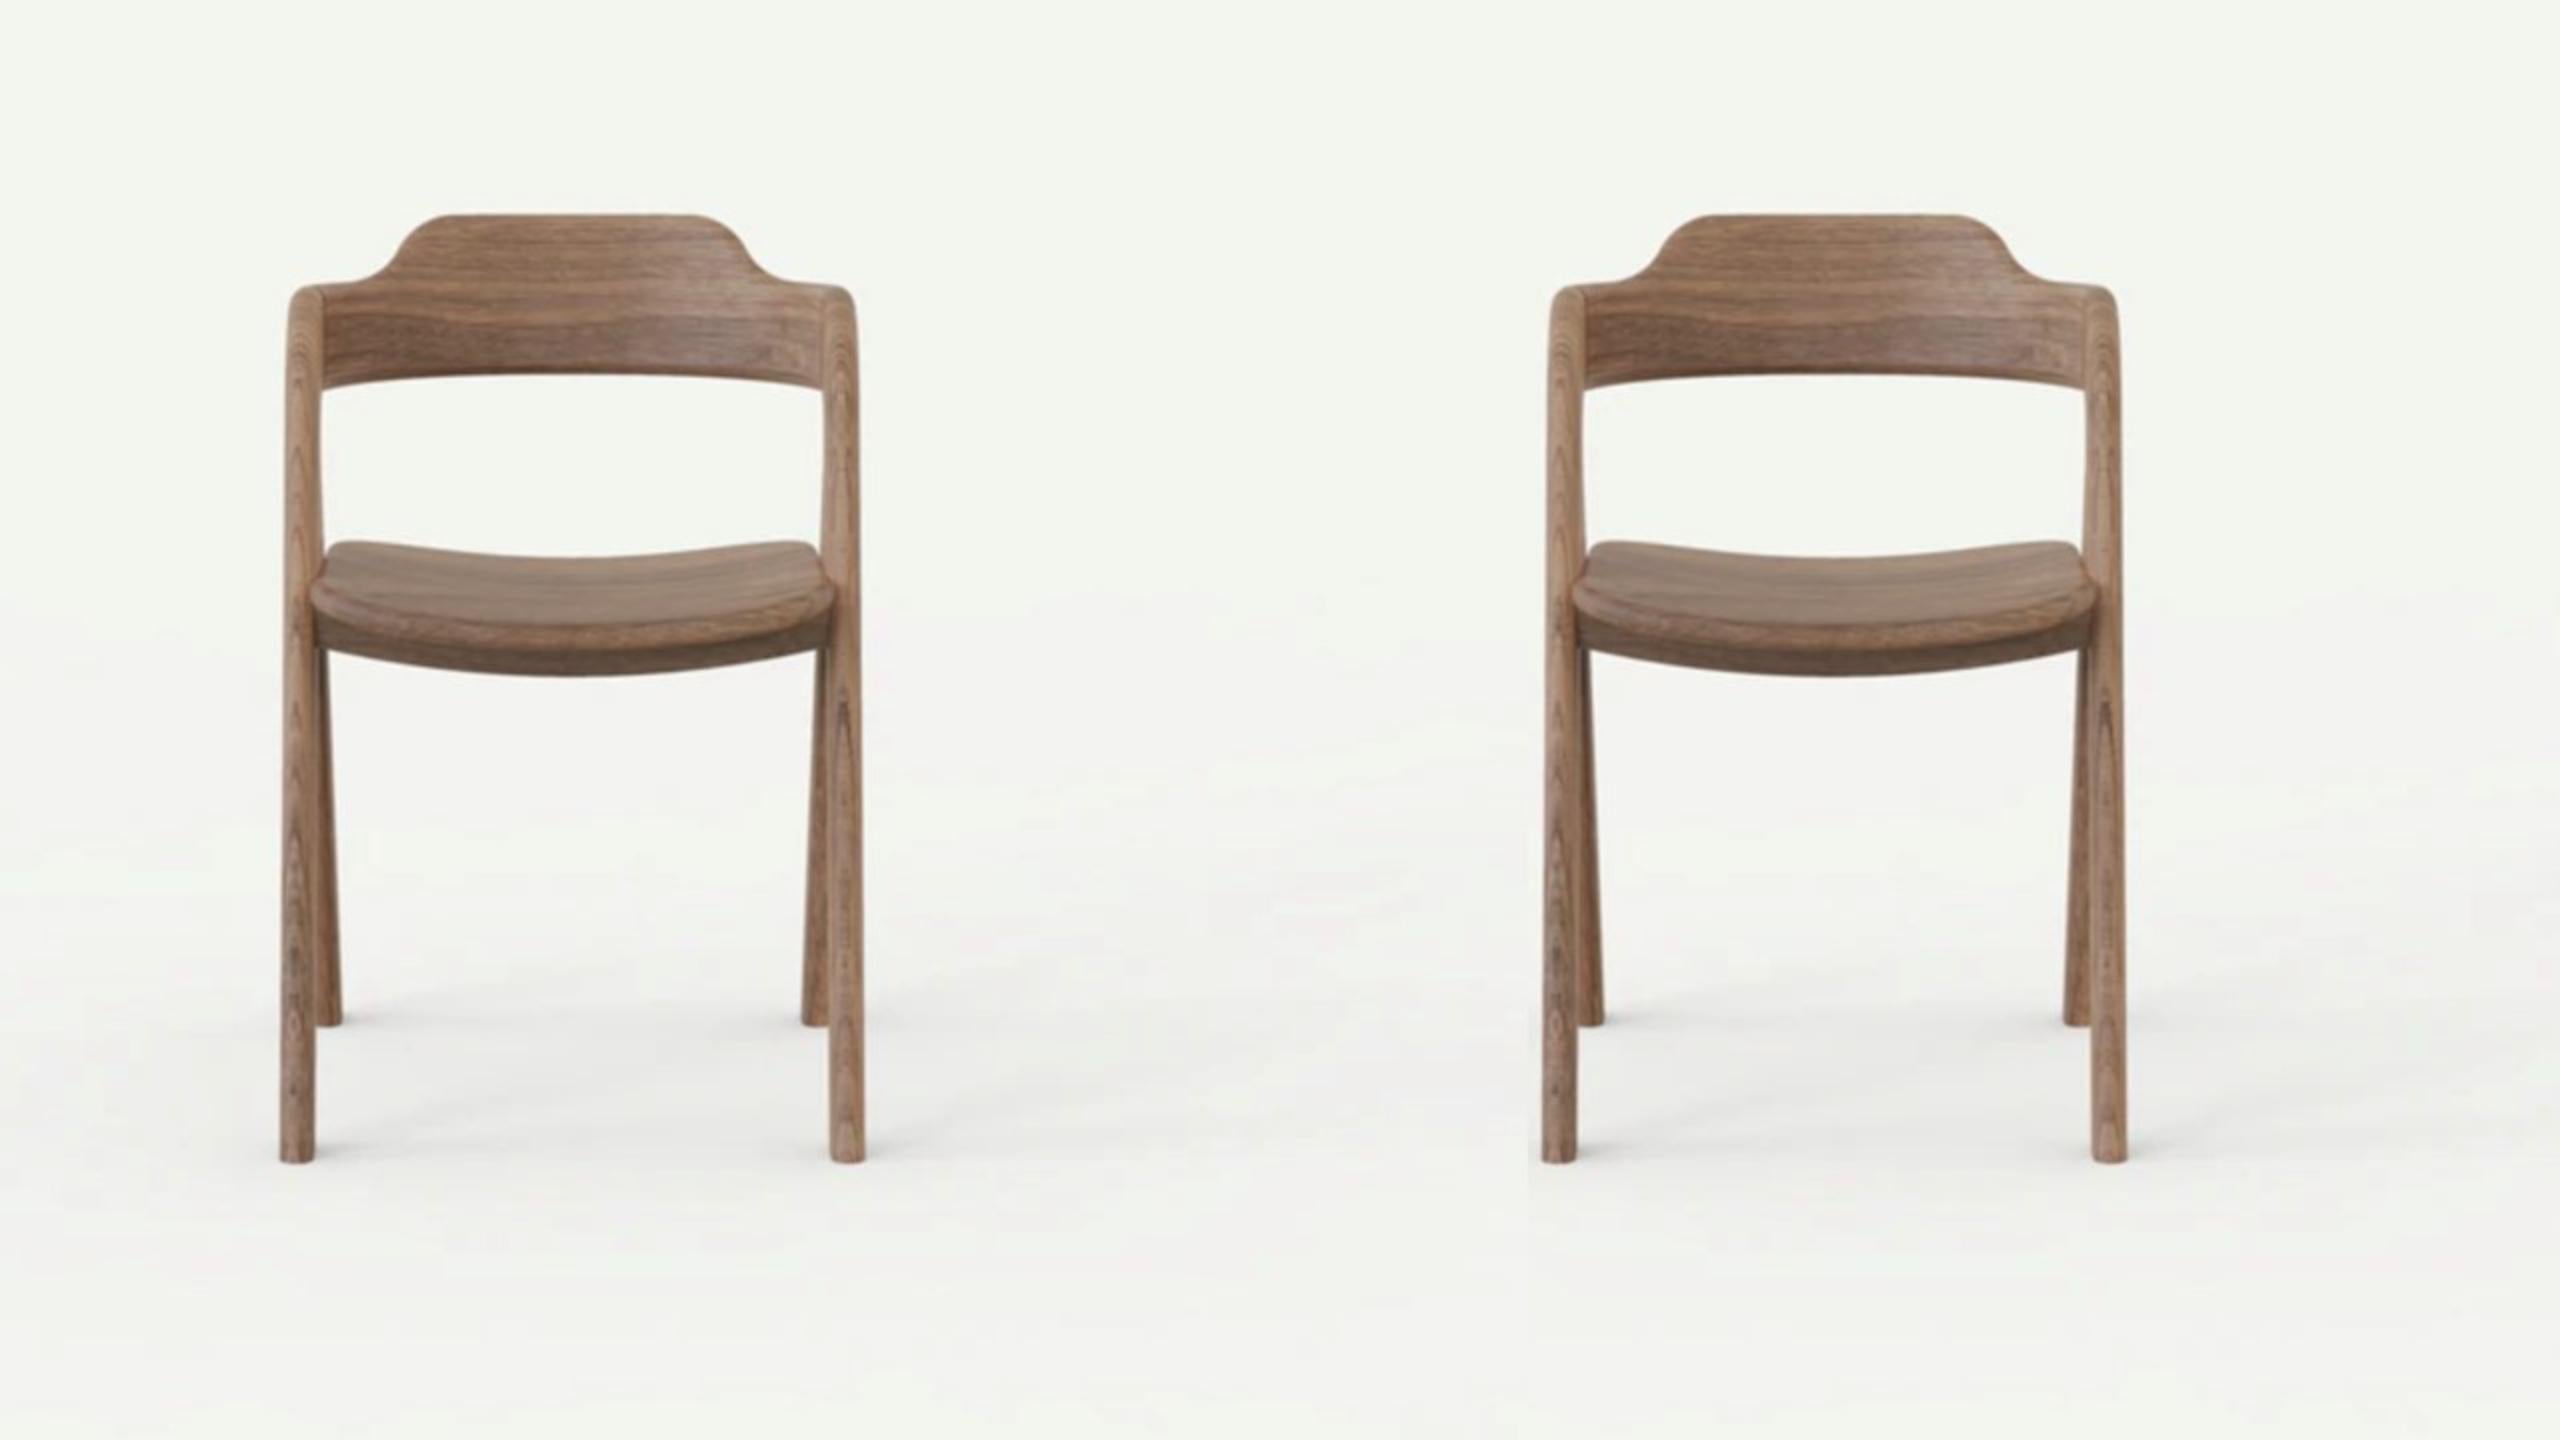 Set of 2 balance chairs by Sebastián Angeles
Material: Walnut
Dimensions: W 40 x D 40 x 100 cm
Also Available: Other colors available.

The love of processes, the properties of materials, details and concepts make Dorica Taller a study not only